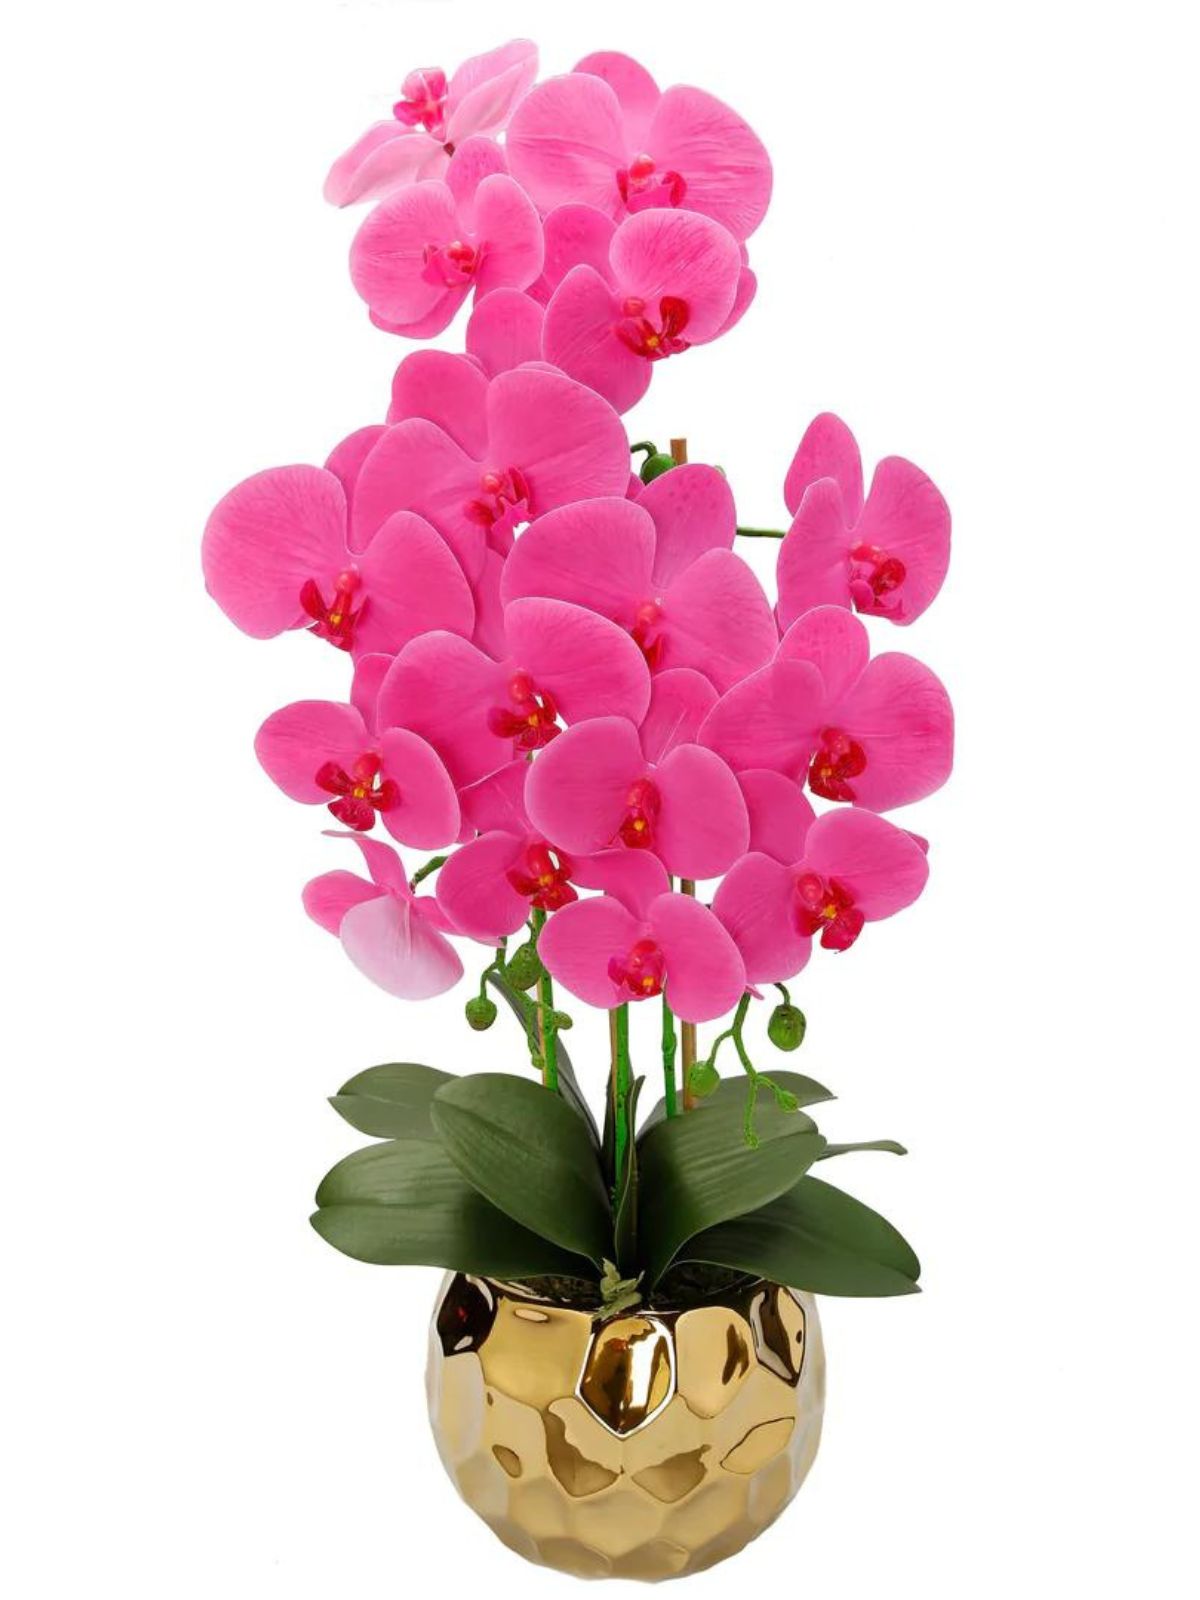 Pink Silk Orchid Floral Arrangement sitting on a bed of green leaves in a Round Gold Hammered Porcelain Vase.